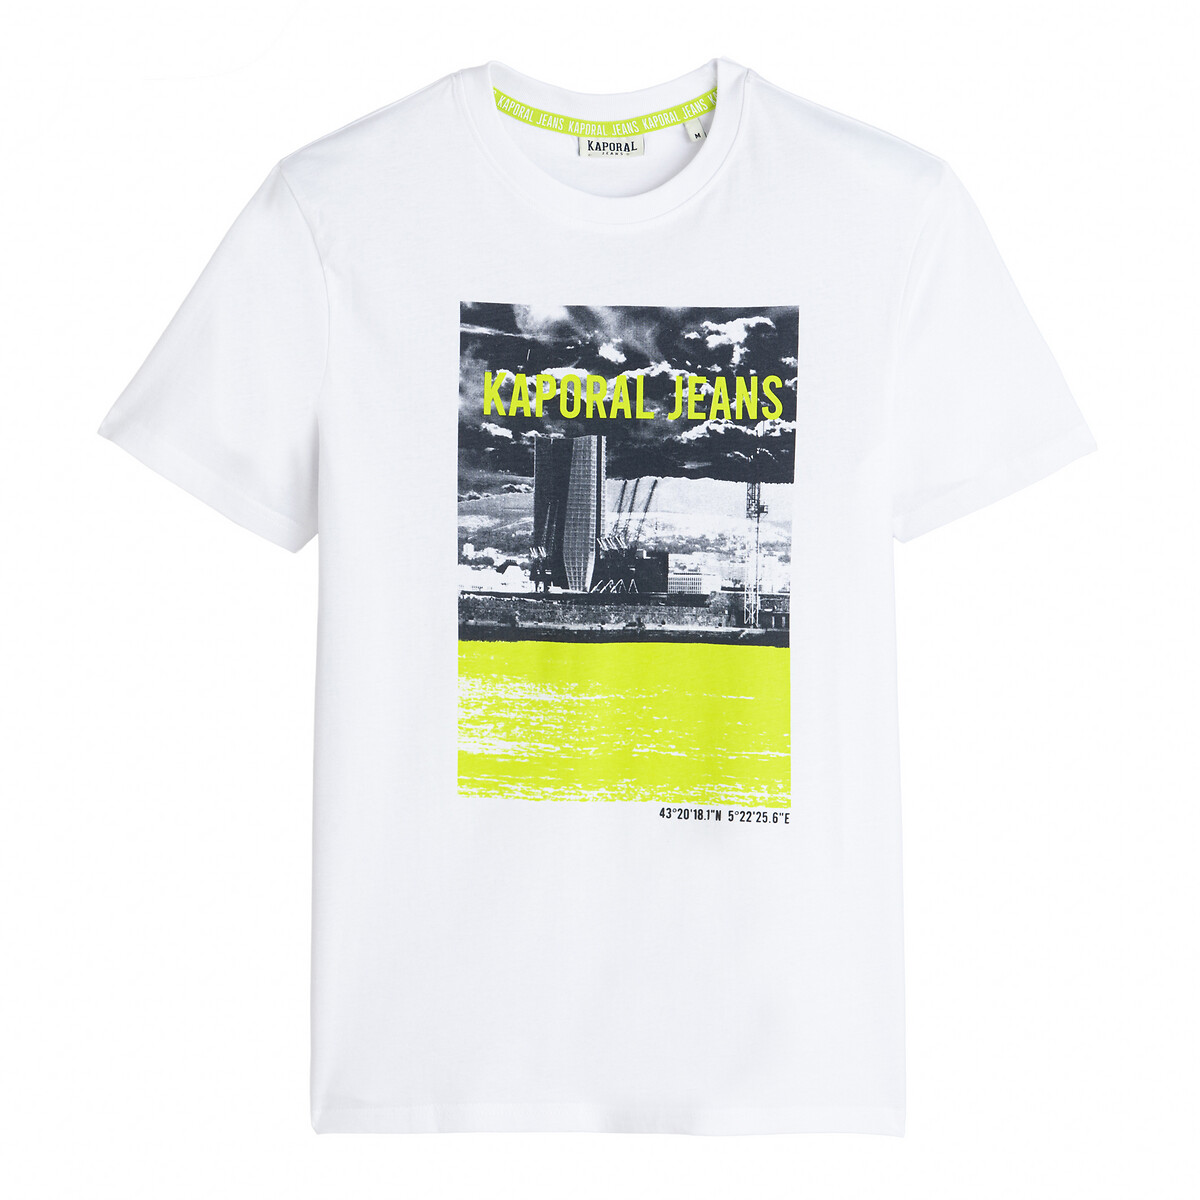 Dock Printed Cotton T-Shirt with Crew Neck